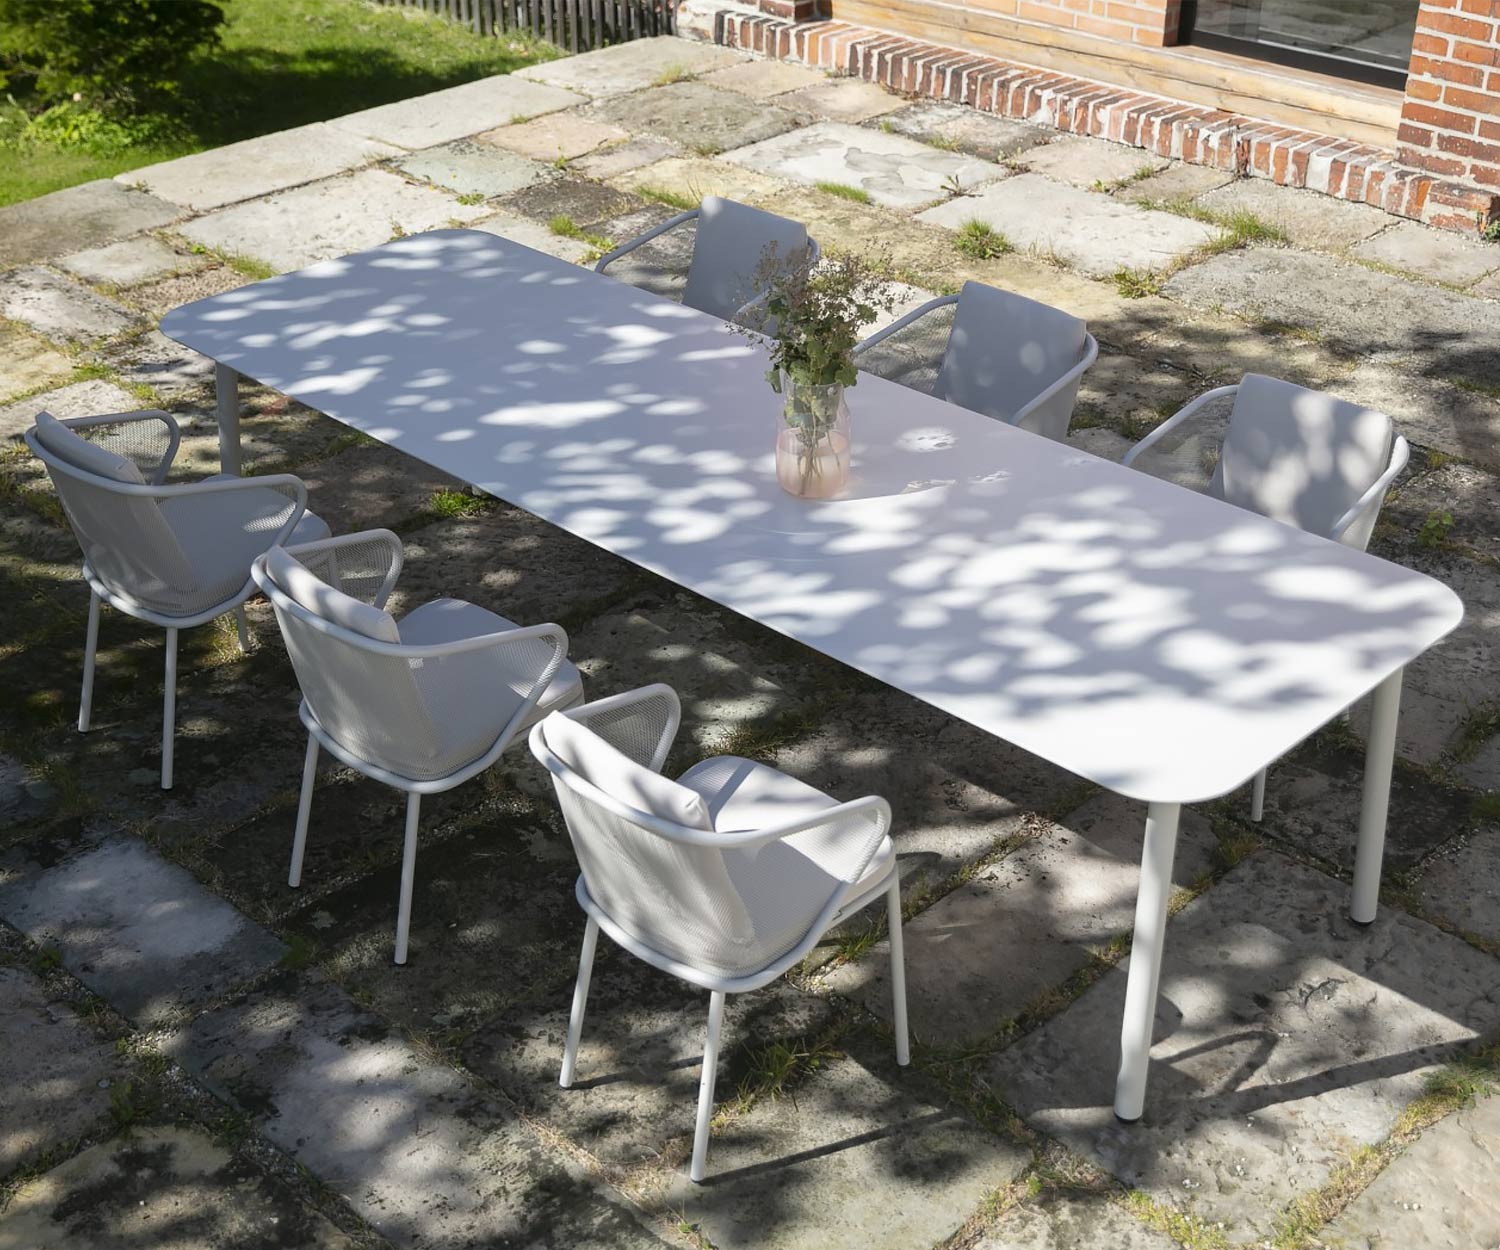 High-quality rectangular Todus Condor design garden table with rounded corners